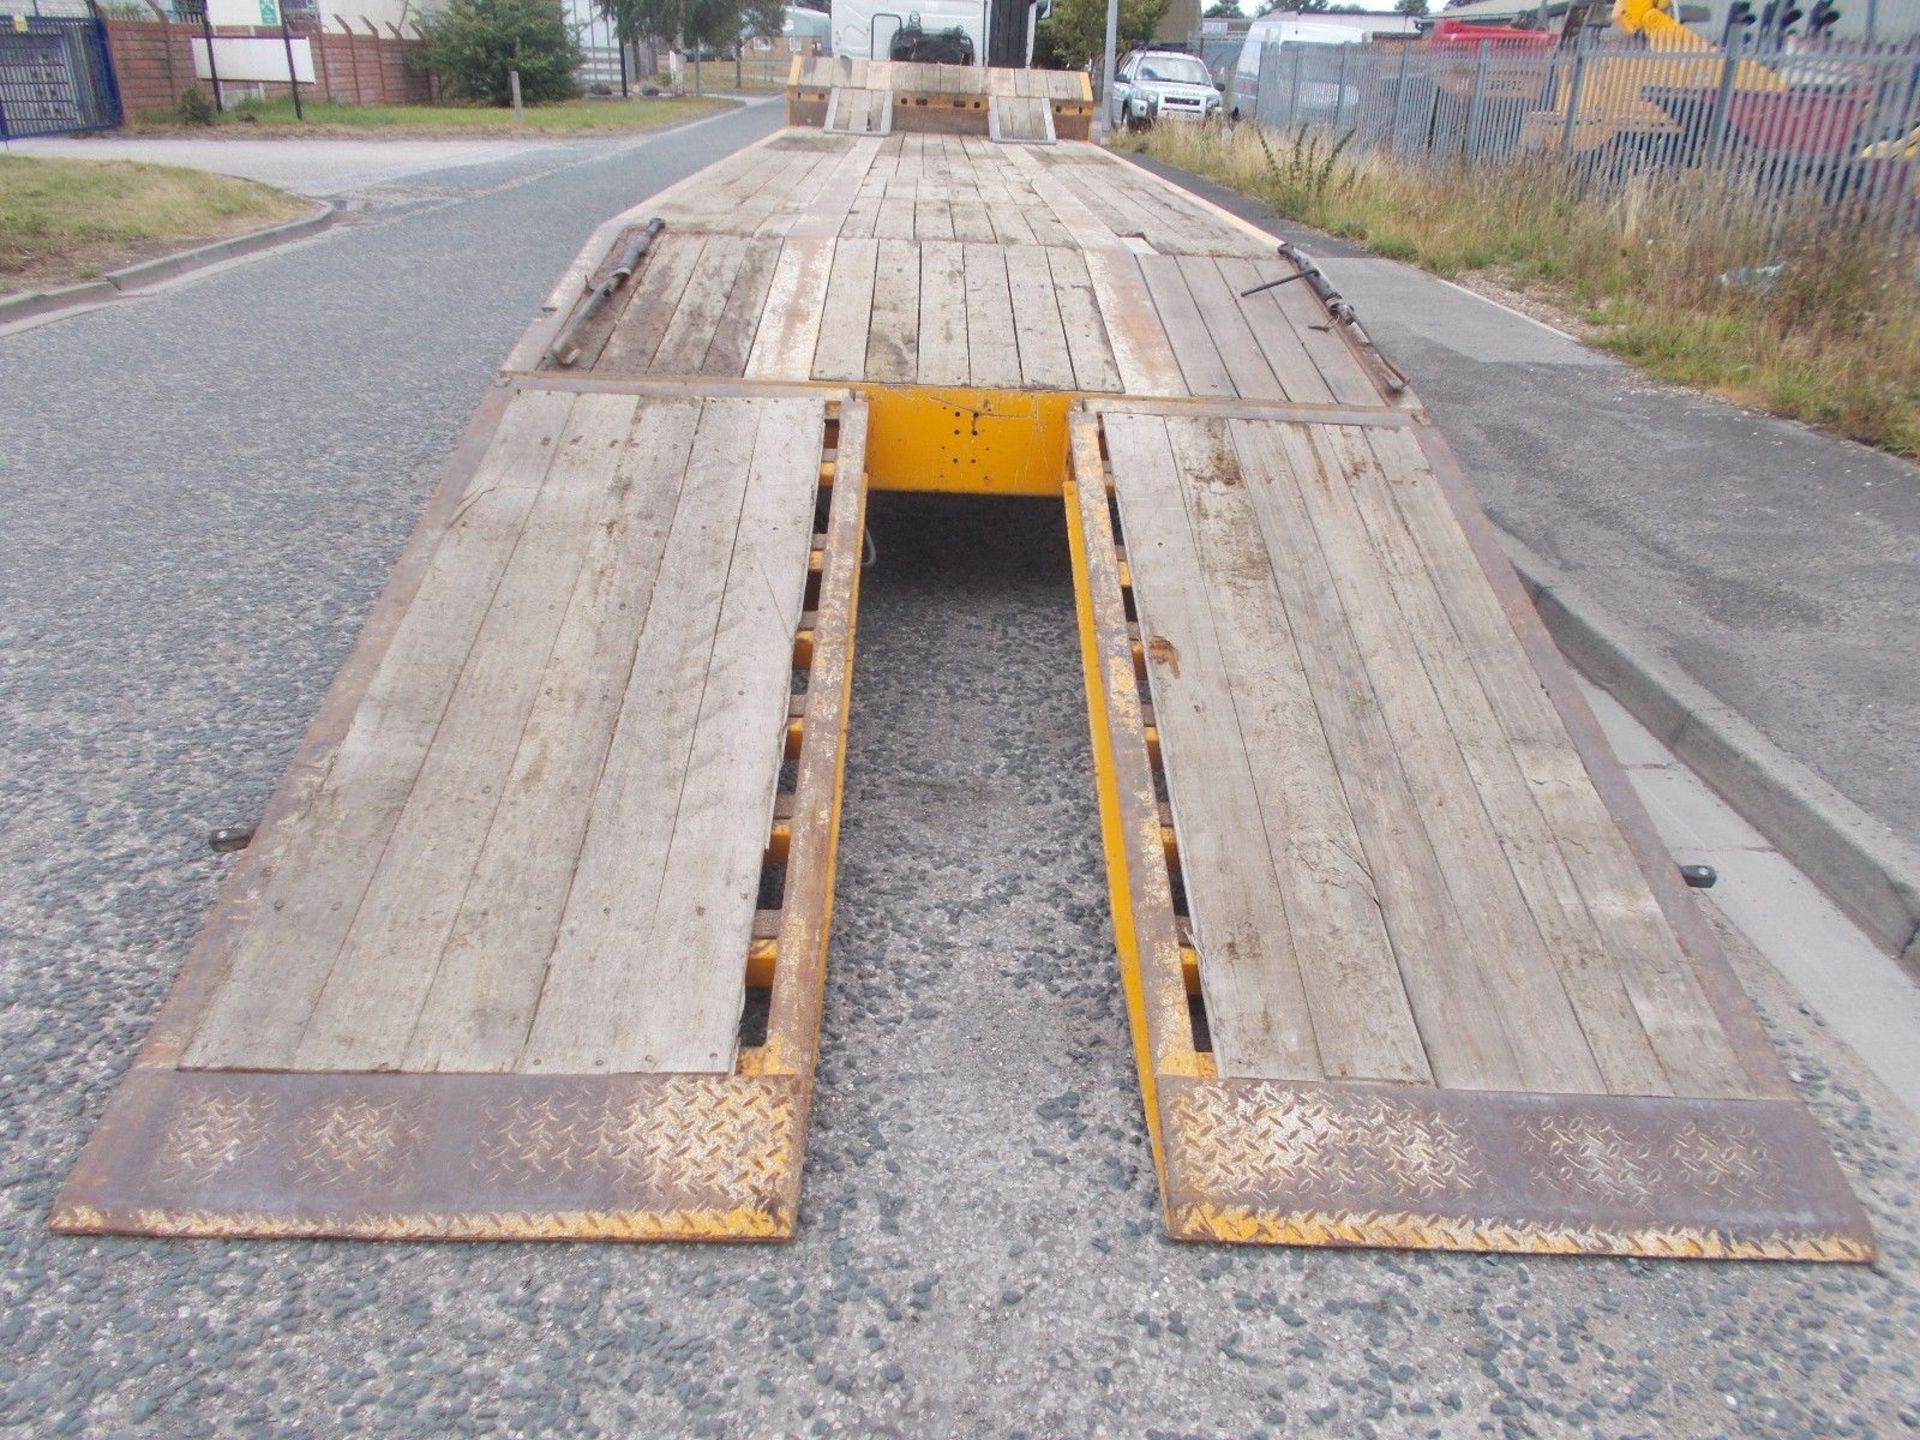 2011 King GTS 44 Low Loader trailer Step Frame Ramps Out Riggers MOT Jan 19 - Image 10 of 10